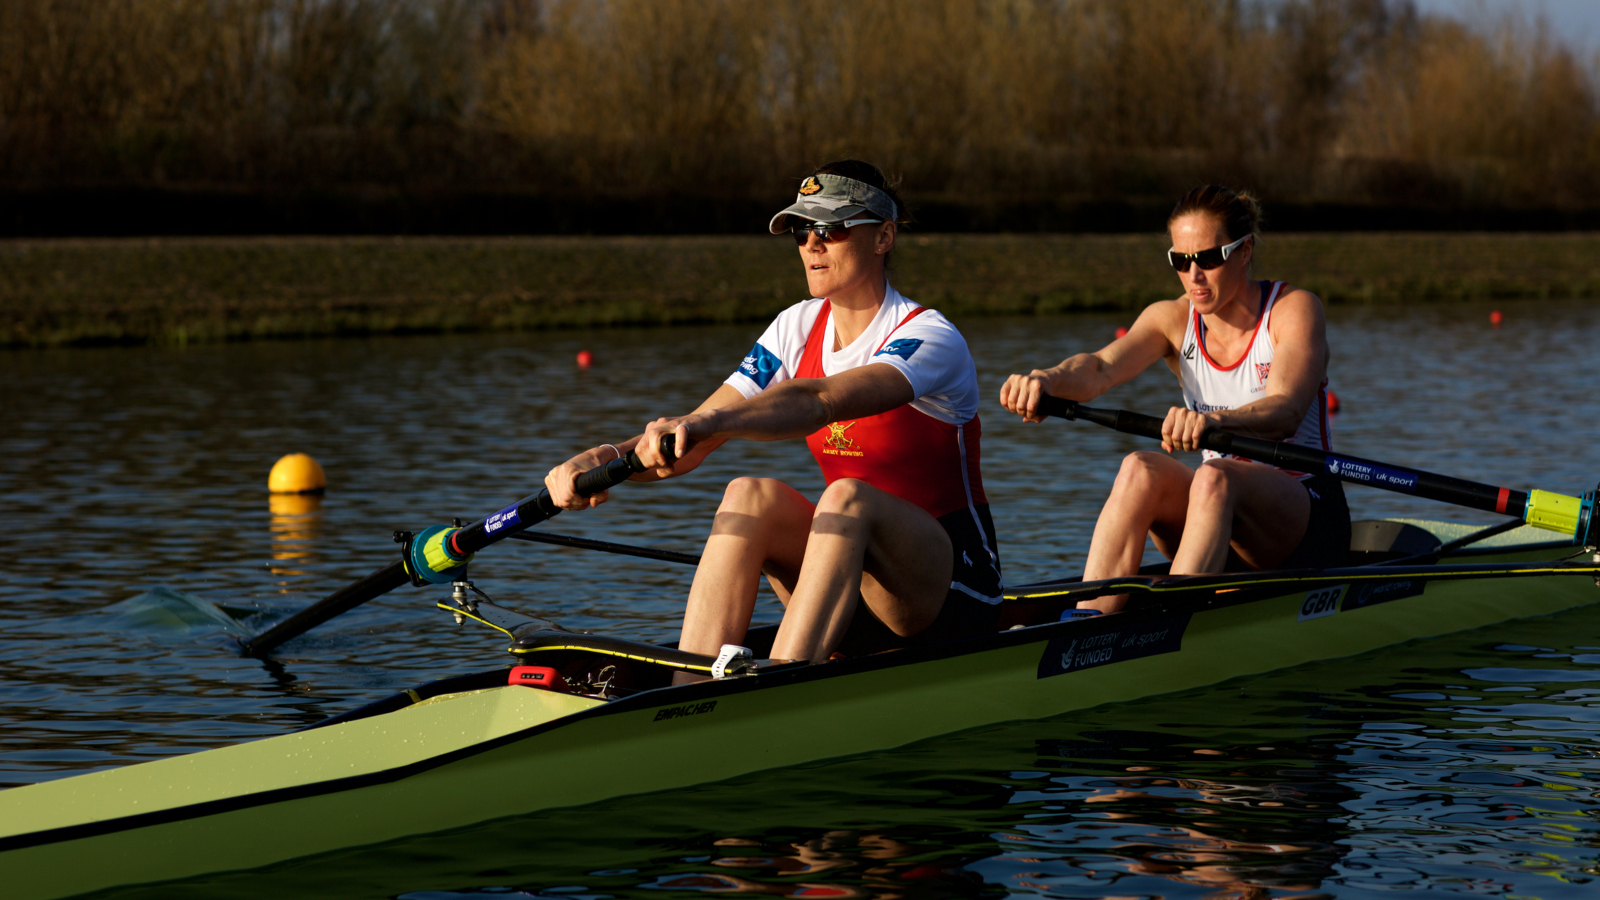 Helen Glover and Heather Stanning pictured in 2016 (c) Naomi Baker